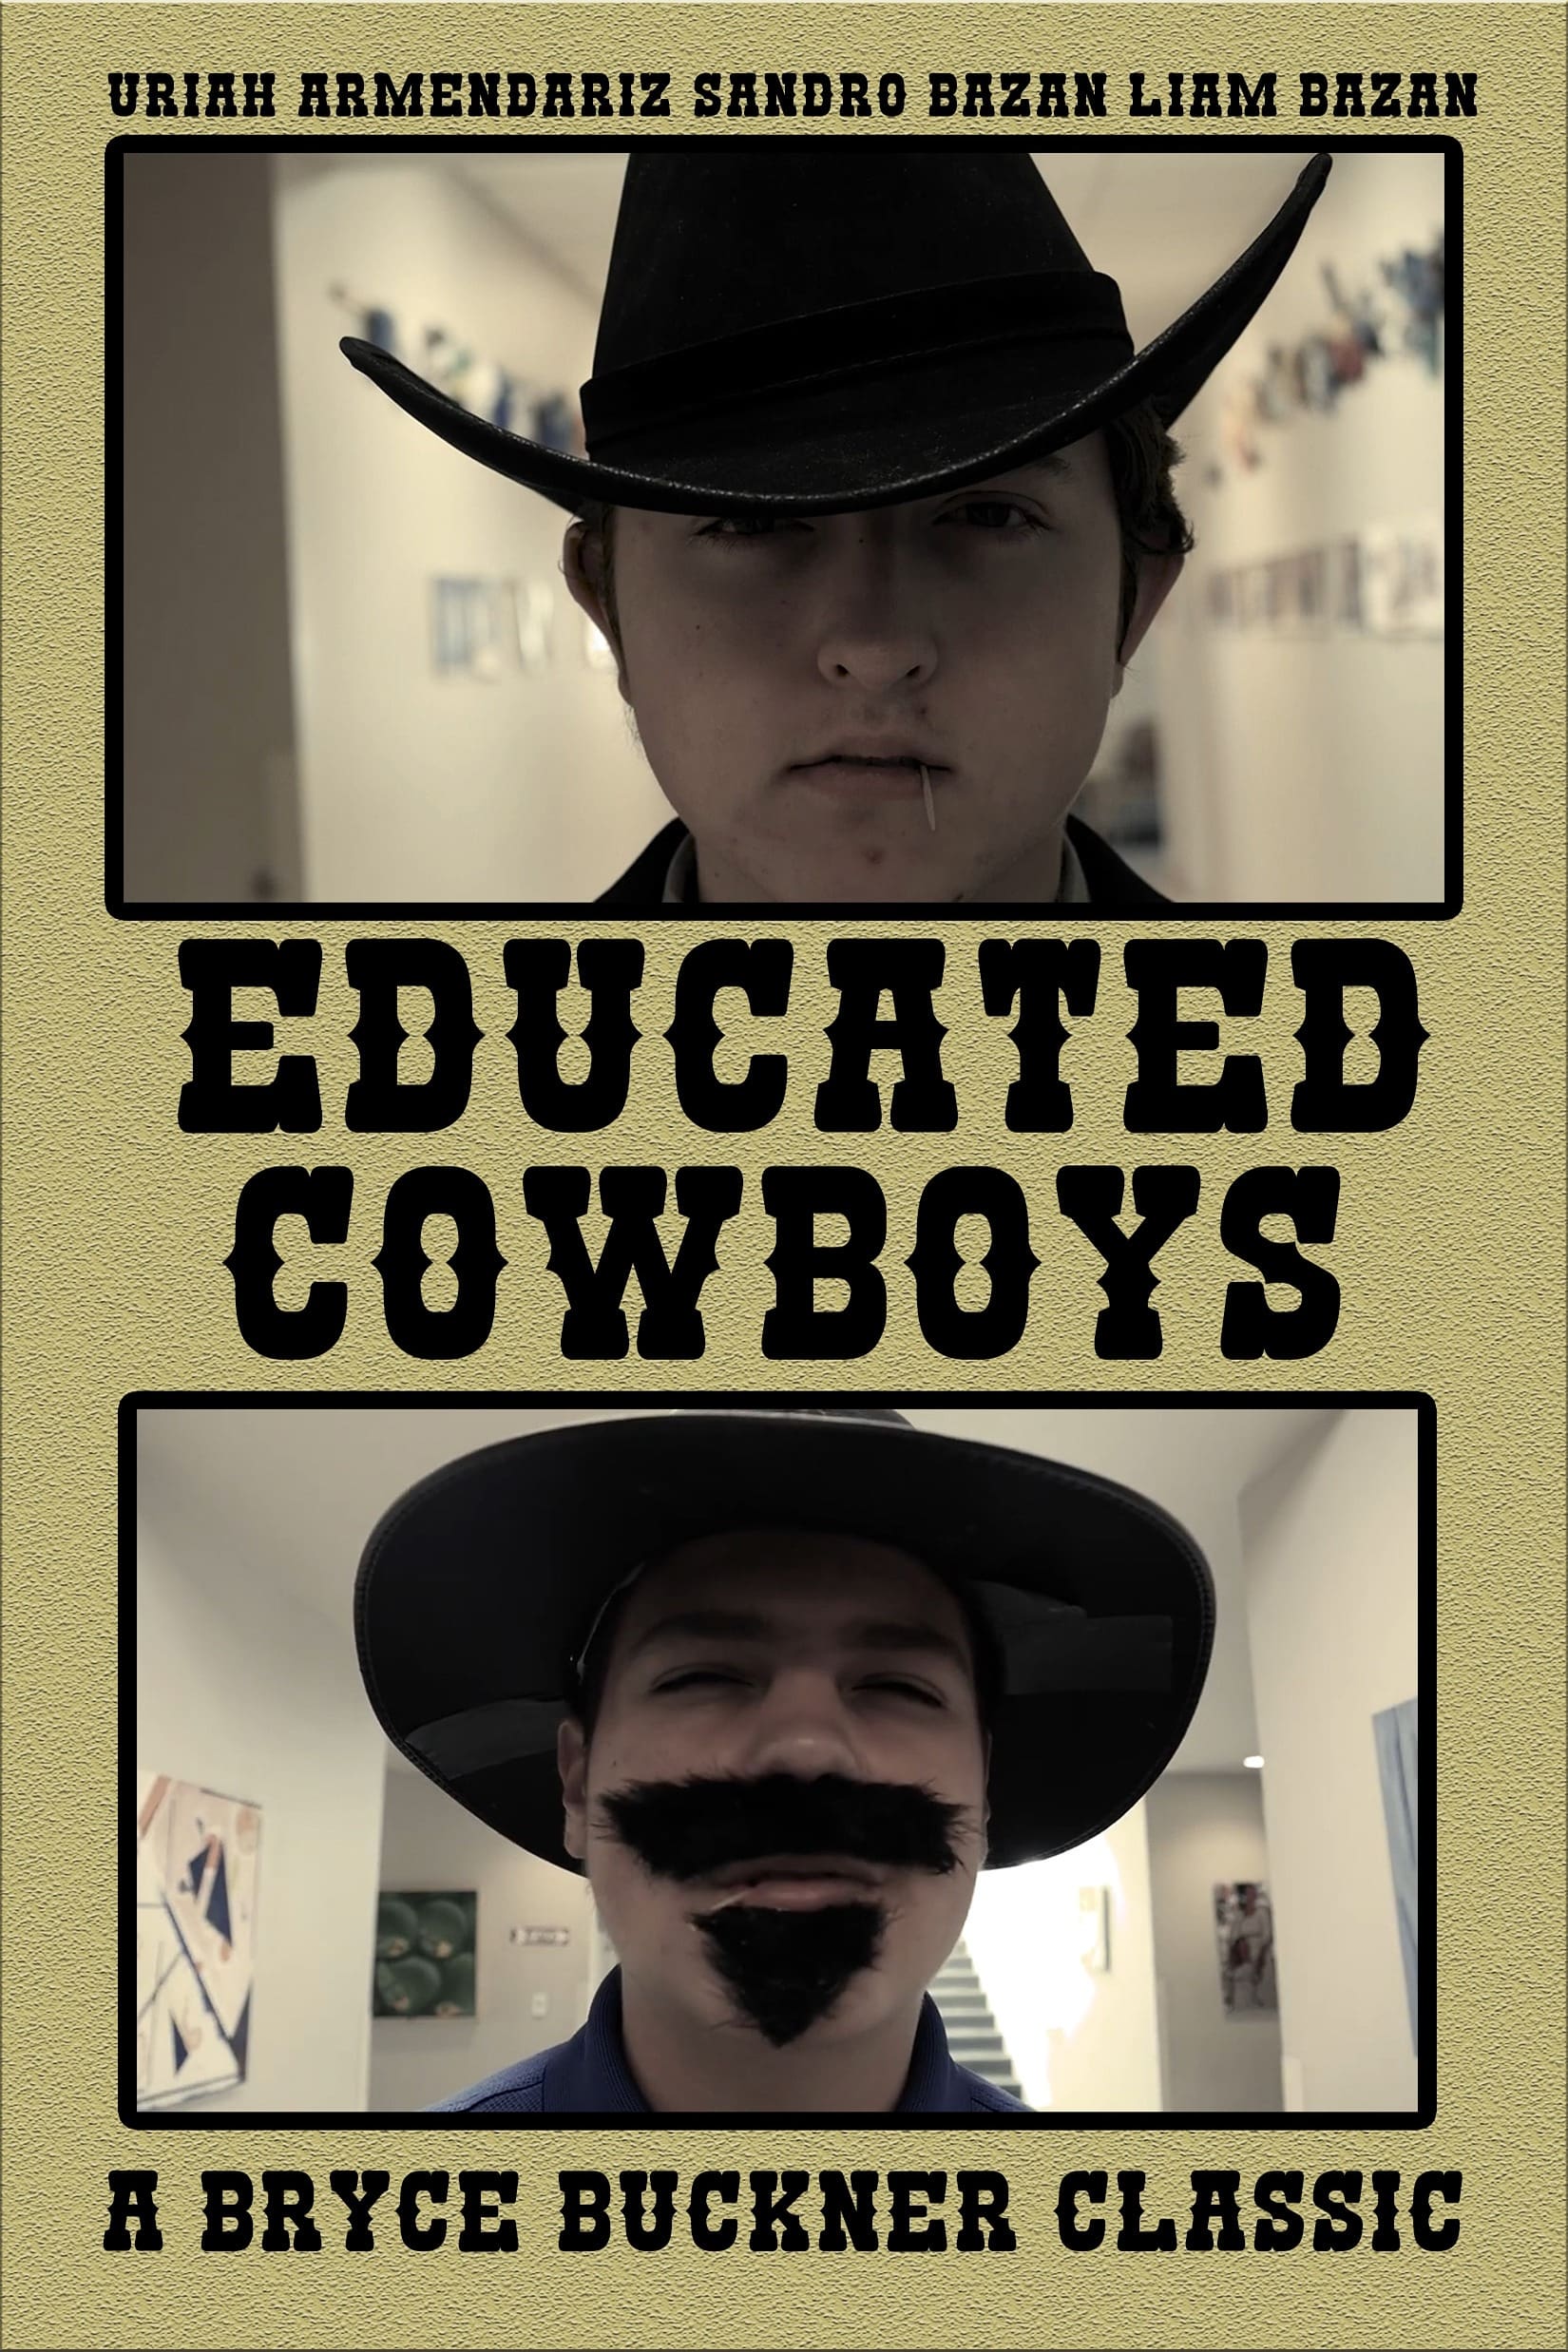 Educated Cowboys